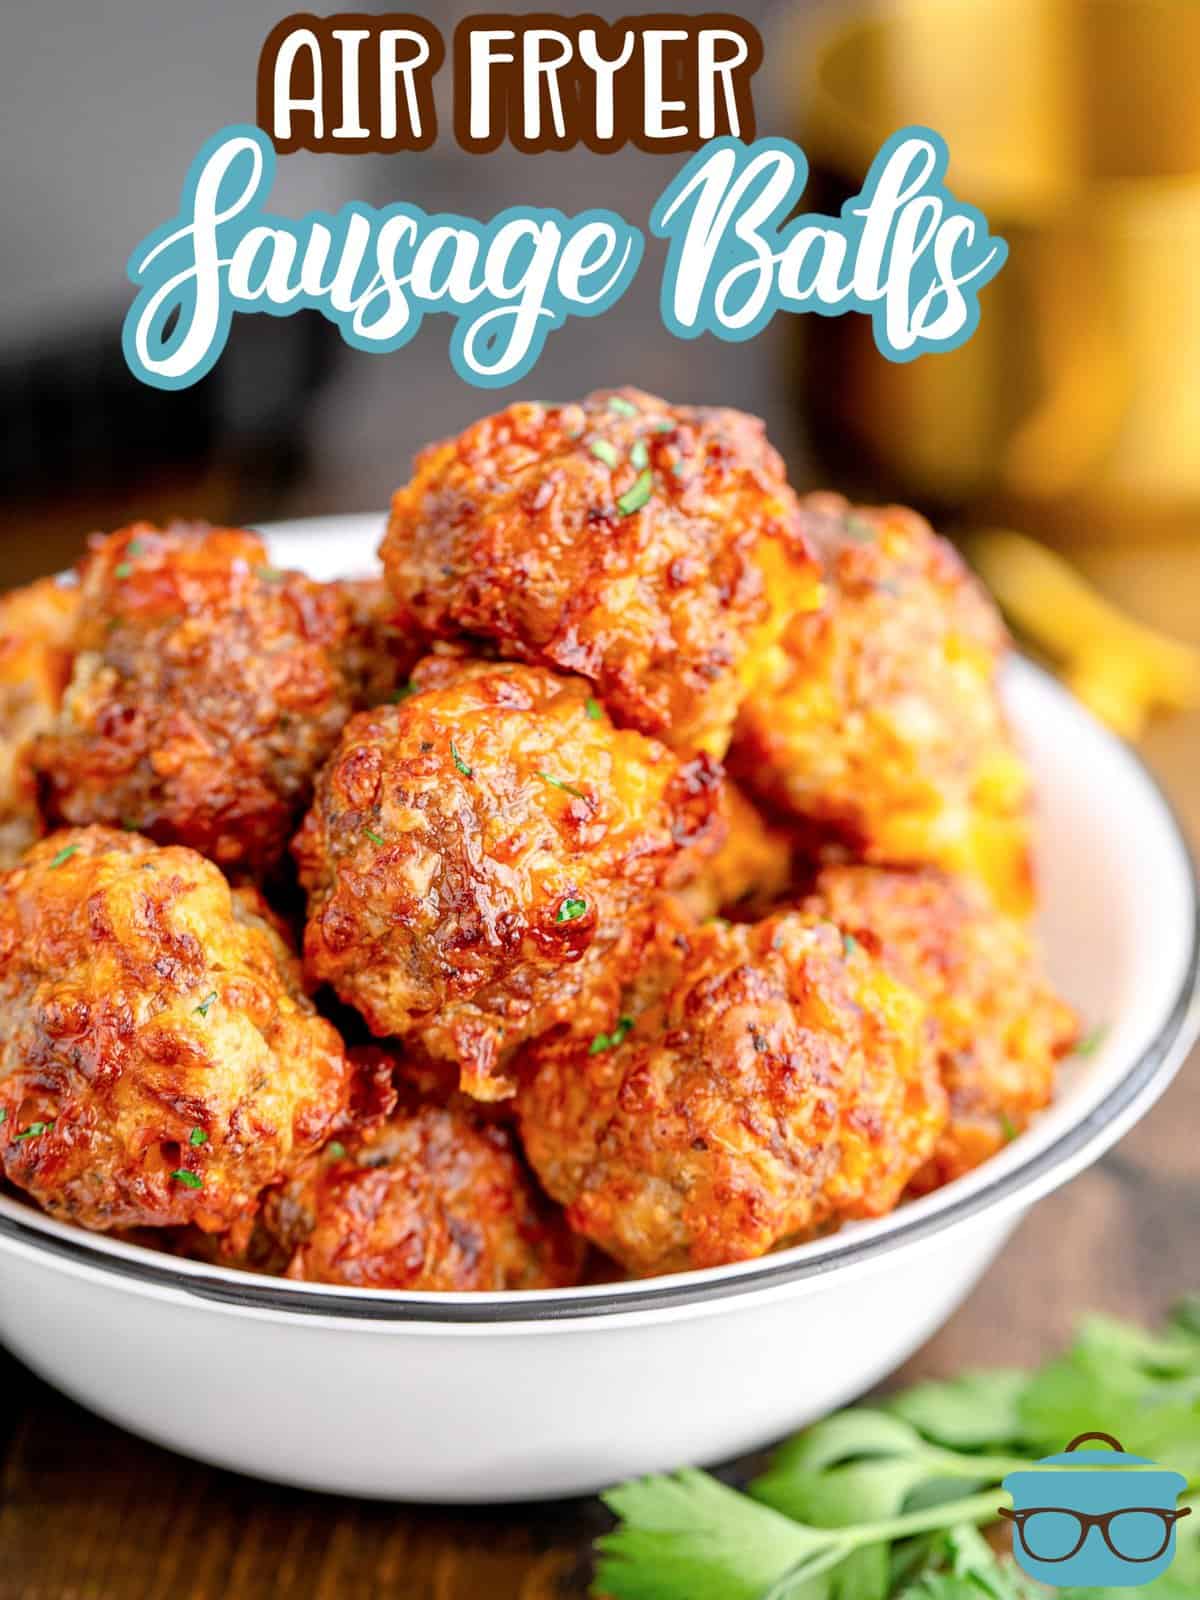 Pinterest image of Air Fryer Sausage Balls stacked in white bowl.